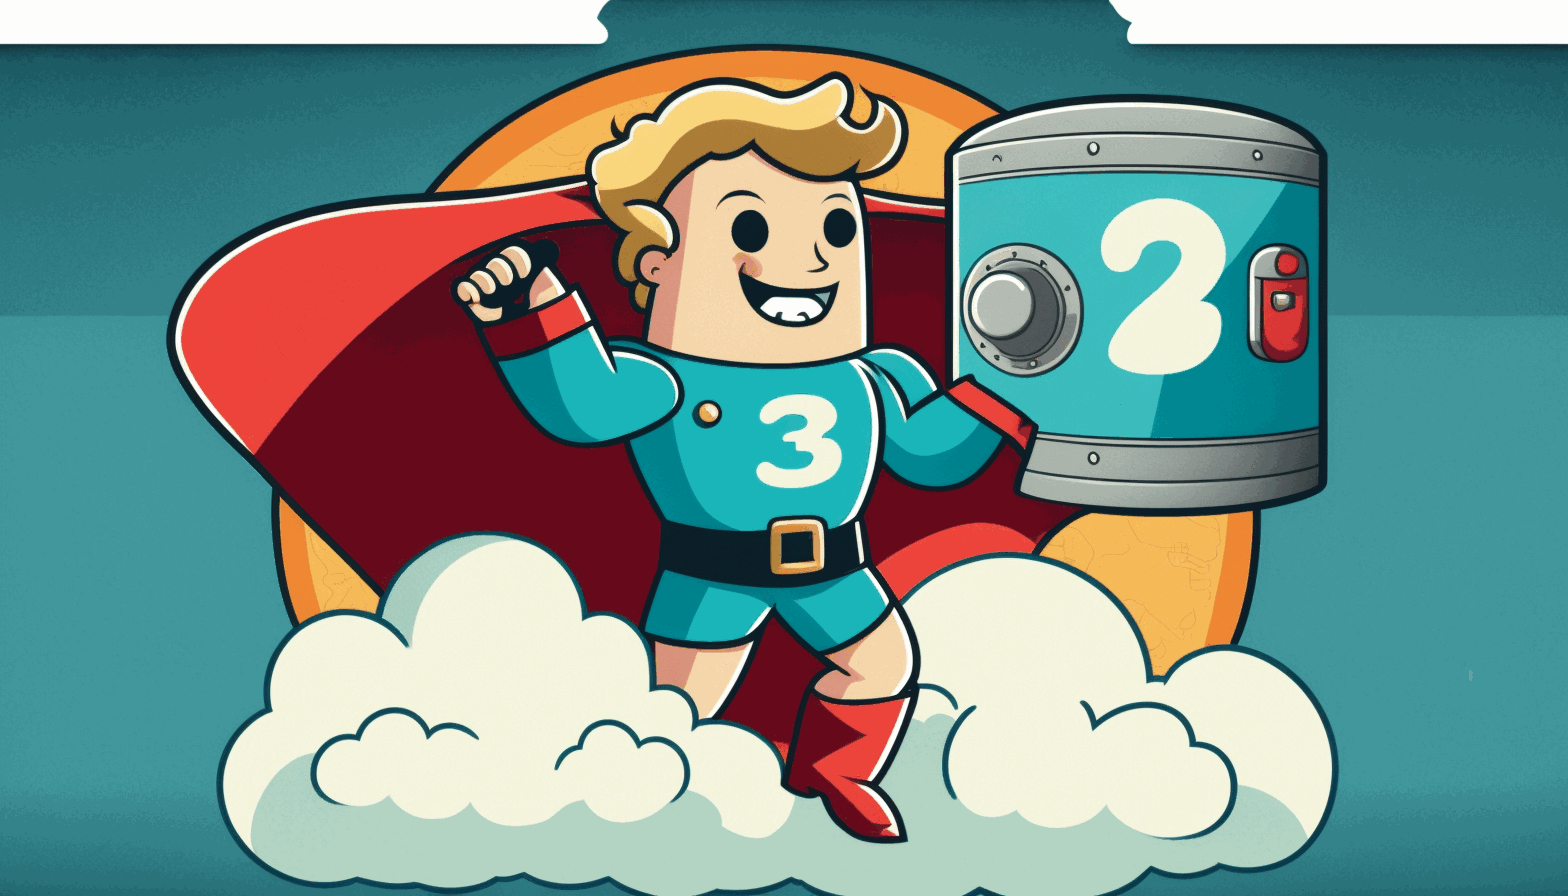 A cartoon character with a cape holding a shield with the number 3 on it, while standing on top of two storage boxes, one representing a hard drive and the other a cloud, and pointing to a globe representing offsite storage.